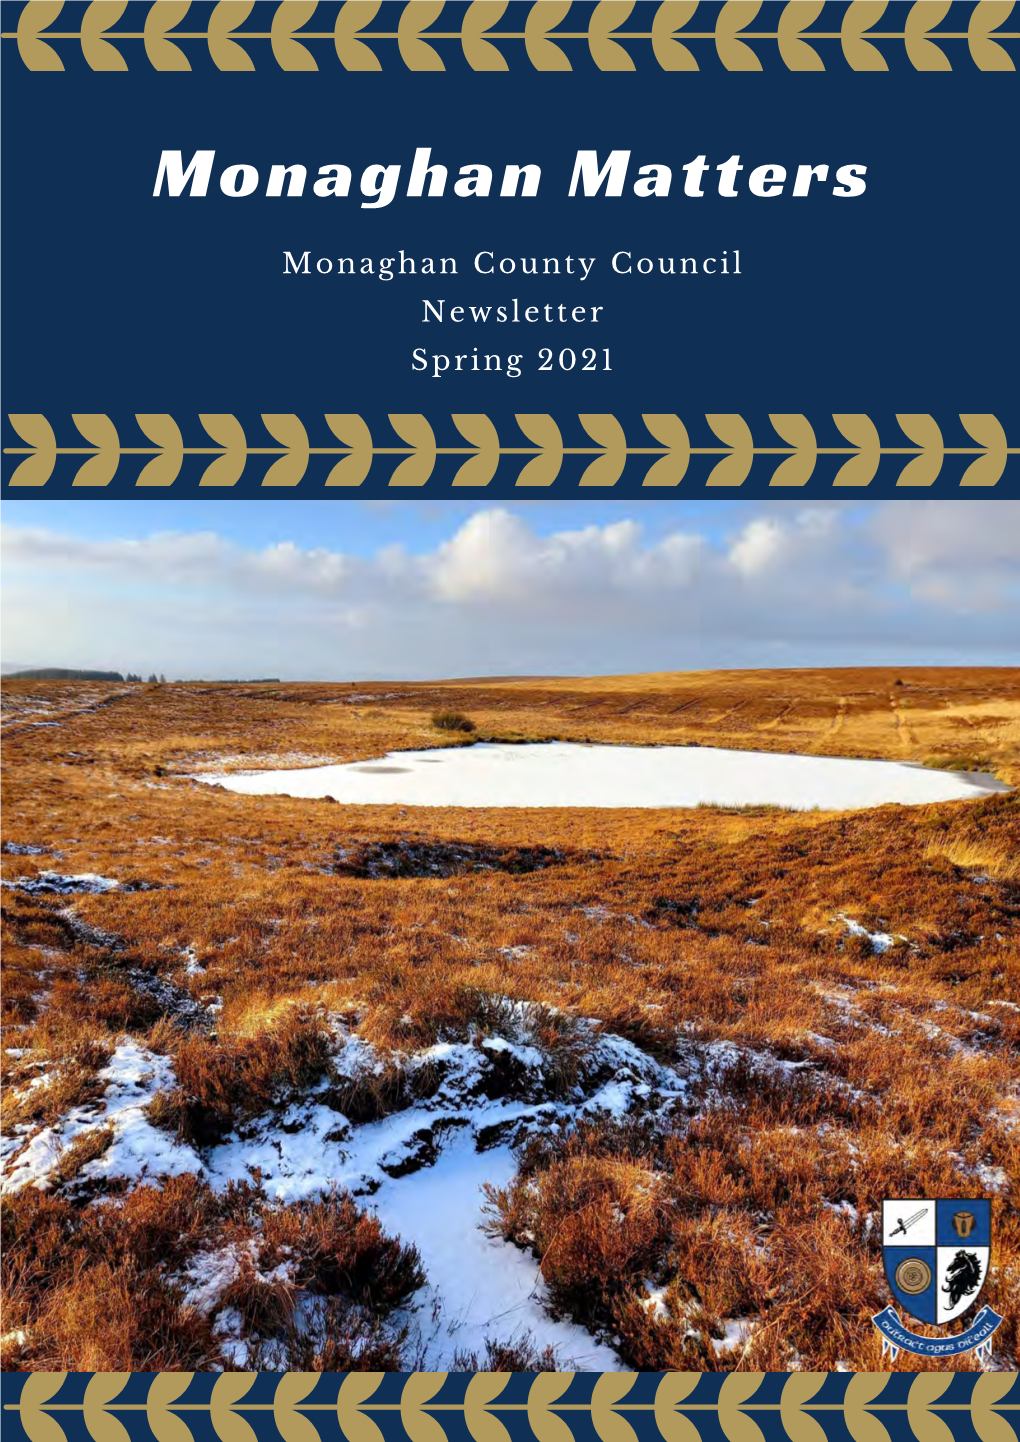 Monaghan County Council Newsletter Spring 2021 (PDF)